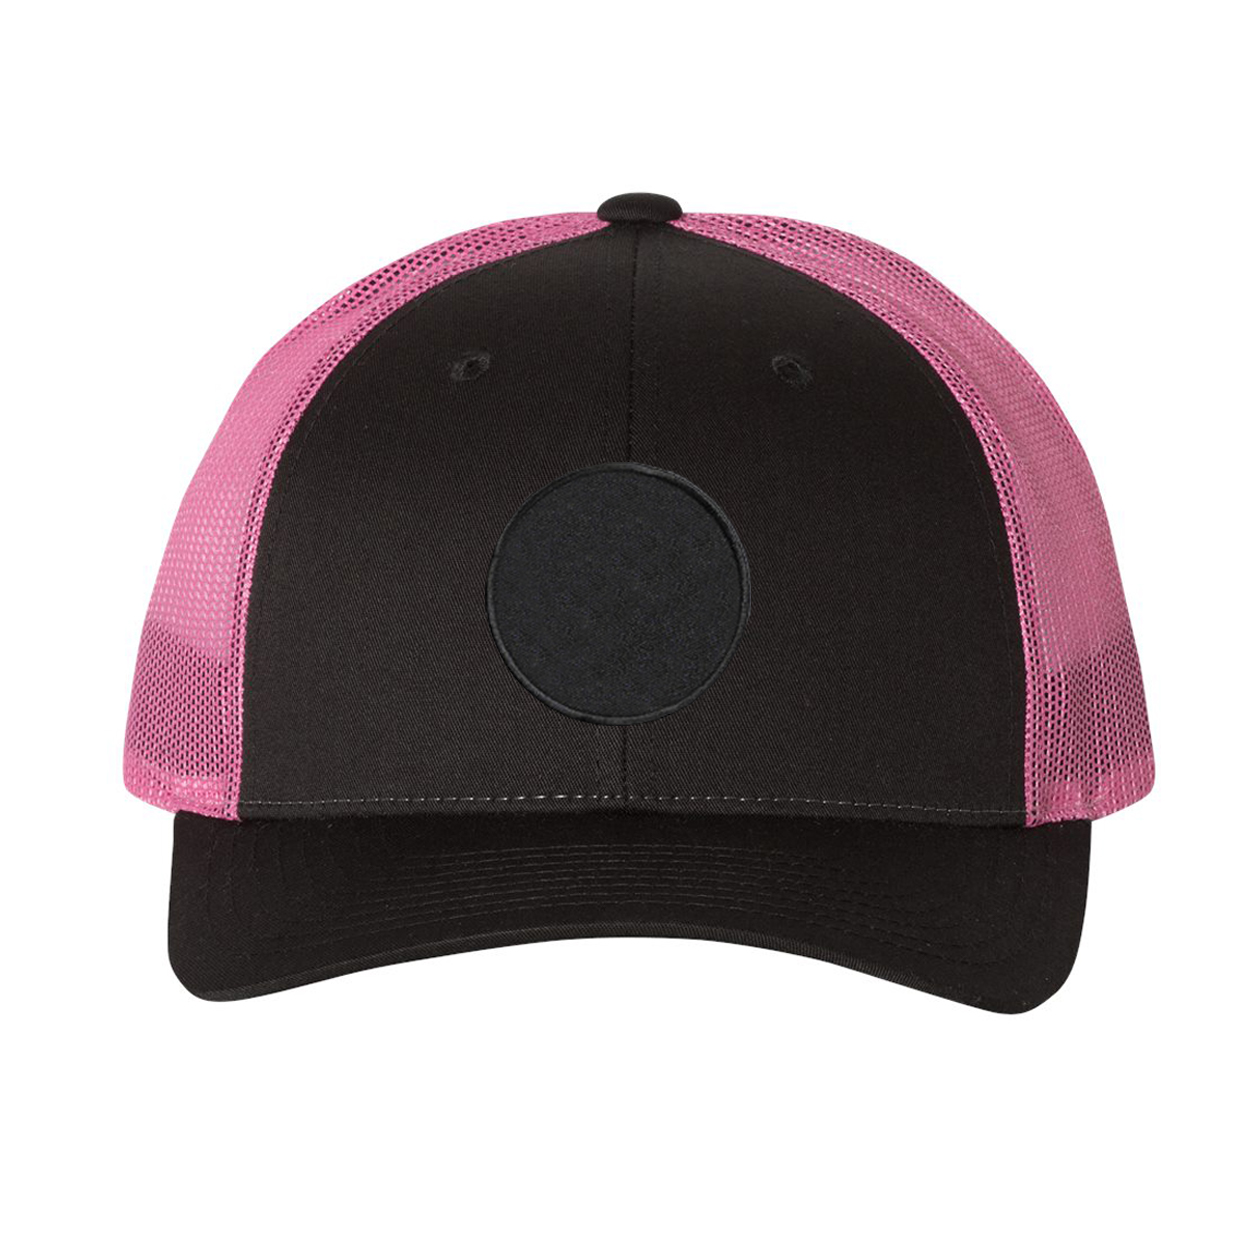 Product Details: Classic Woven Circle Patch Snapback Trucker Hat Gray/Neon Pink (BW 6 PANEL SNAPBACK MESH 5216)